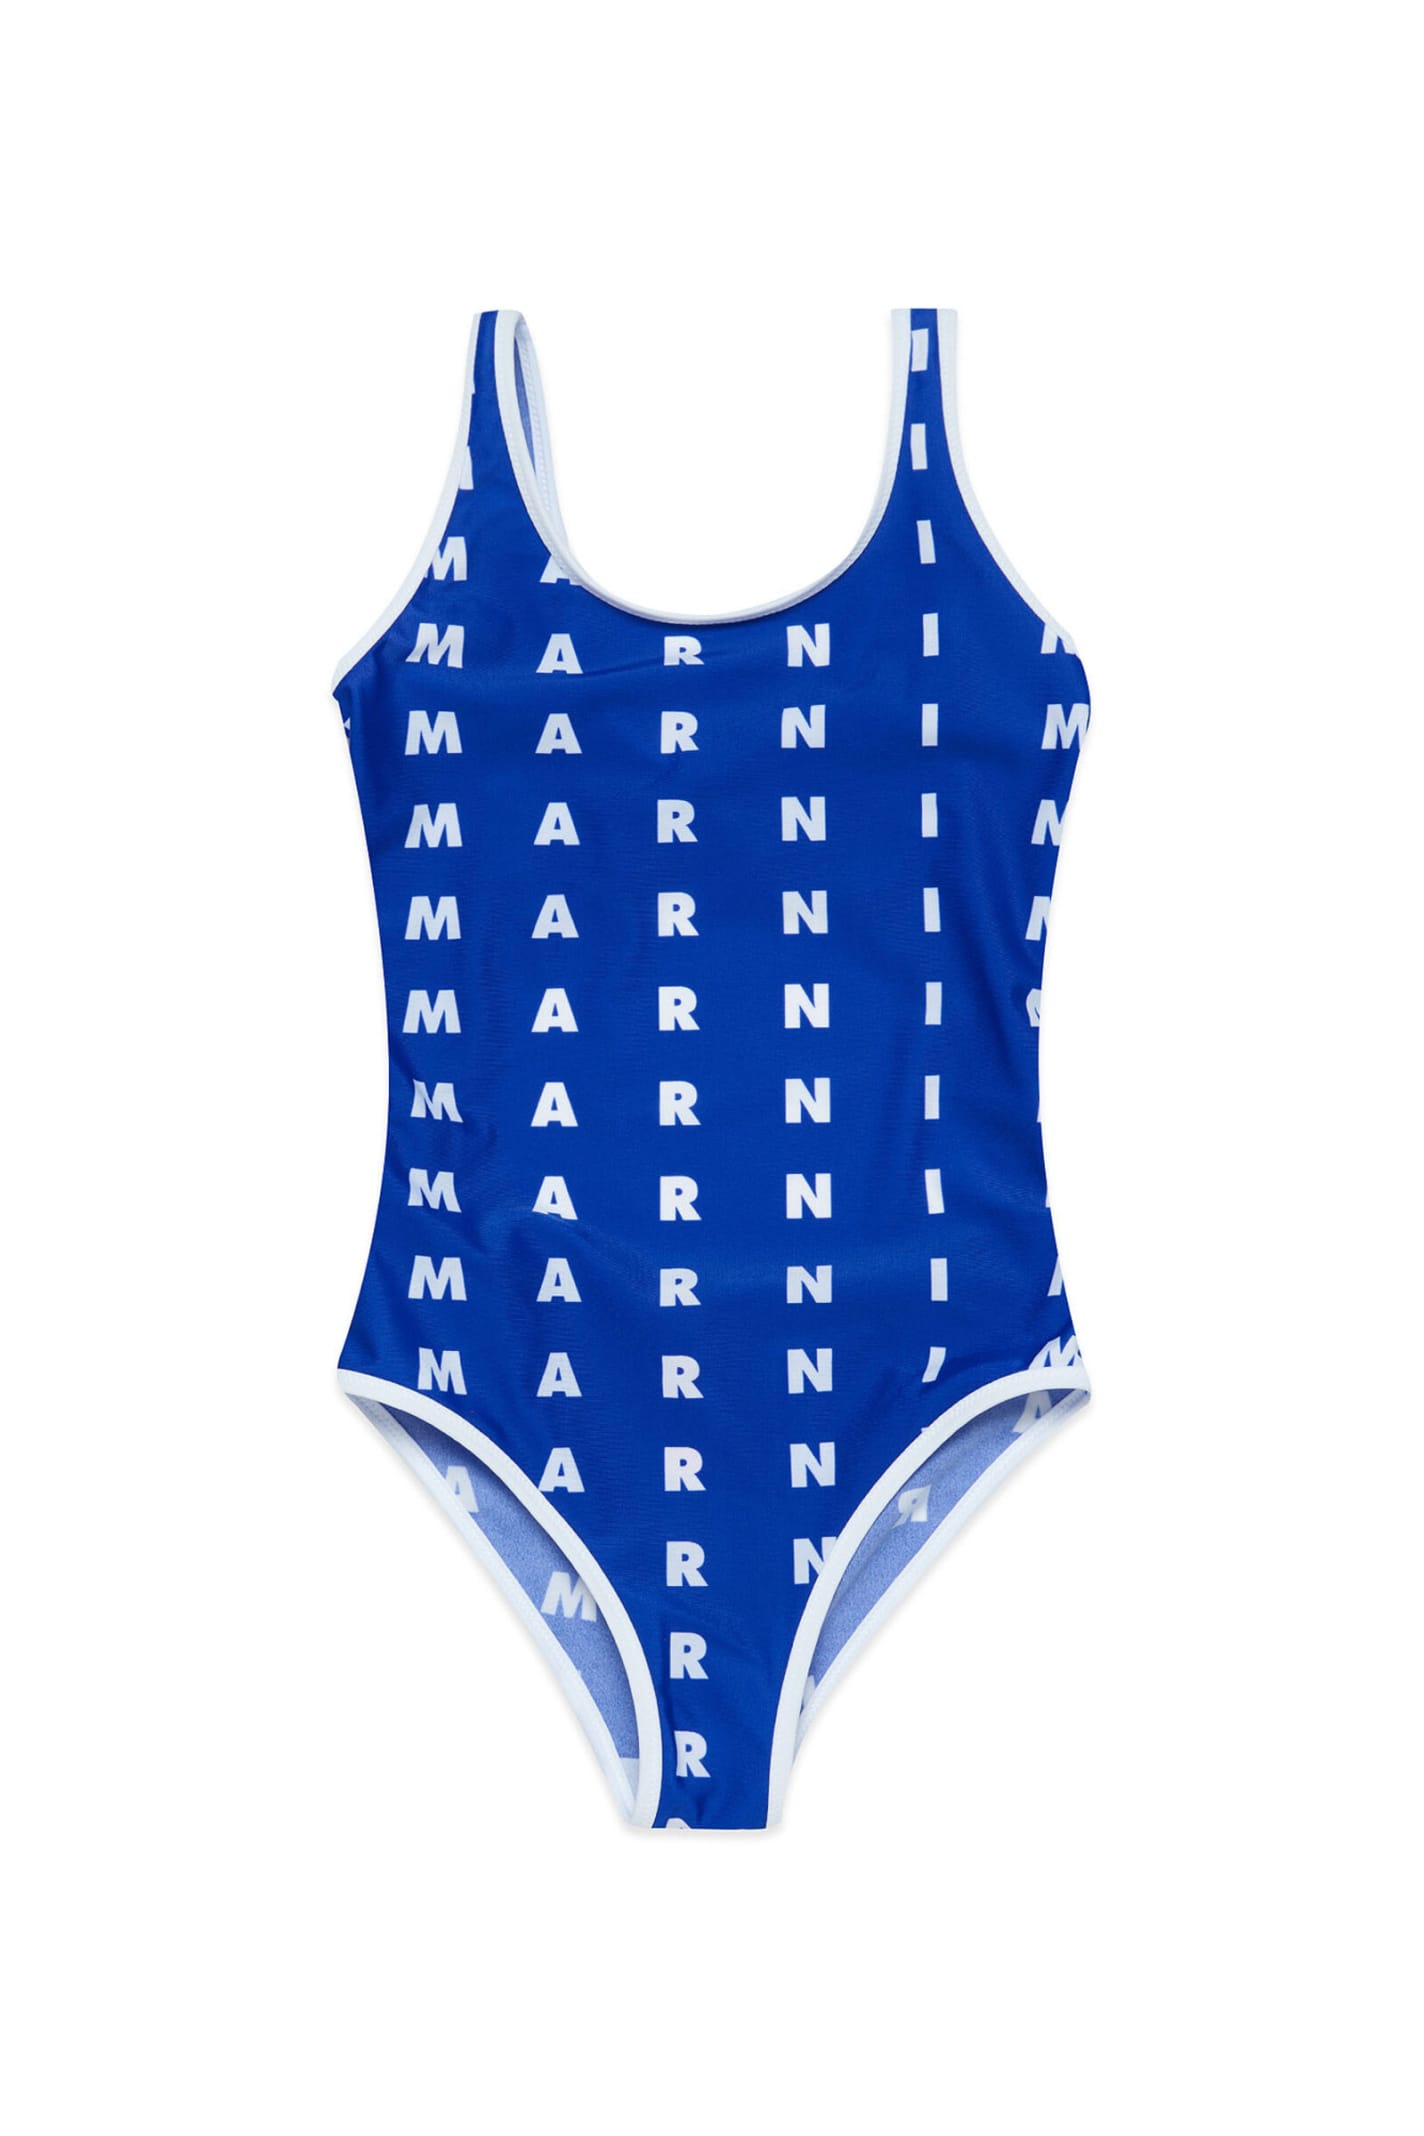 MARNI MM10F SWIMSUIT MARNI BLUE ONE-PIECE SWIMMING COSTUME IN LYCRA WITH ALLOVER LOGO